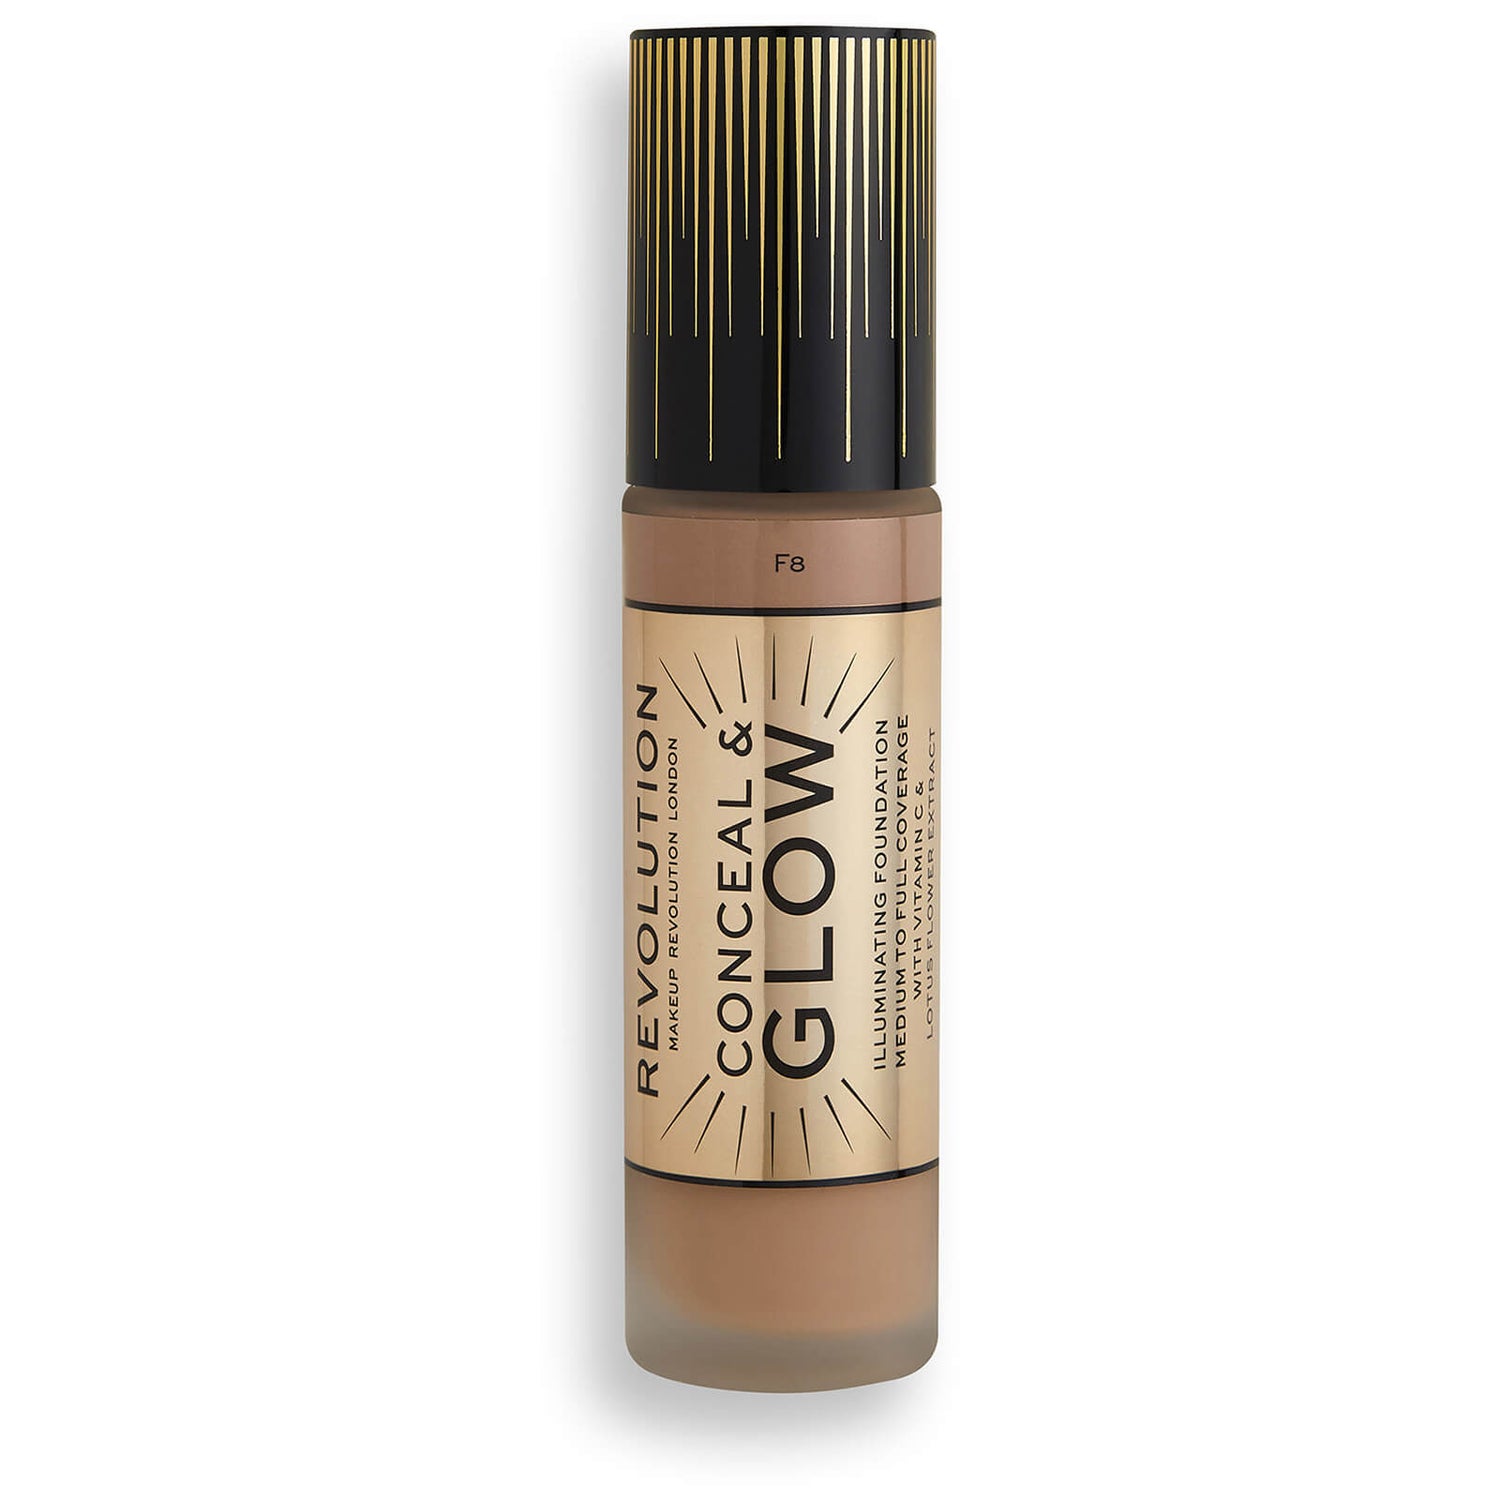 Makeup Revolution Conceal & Glow Foundation - F8